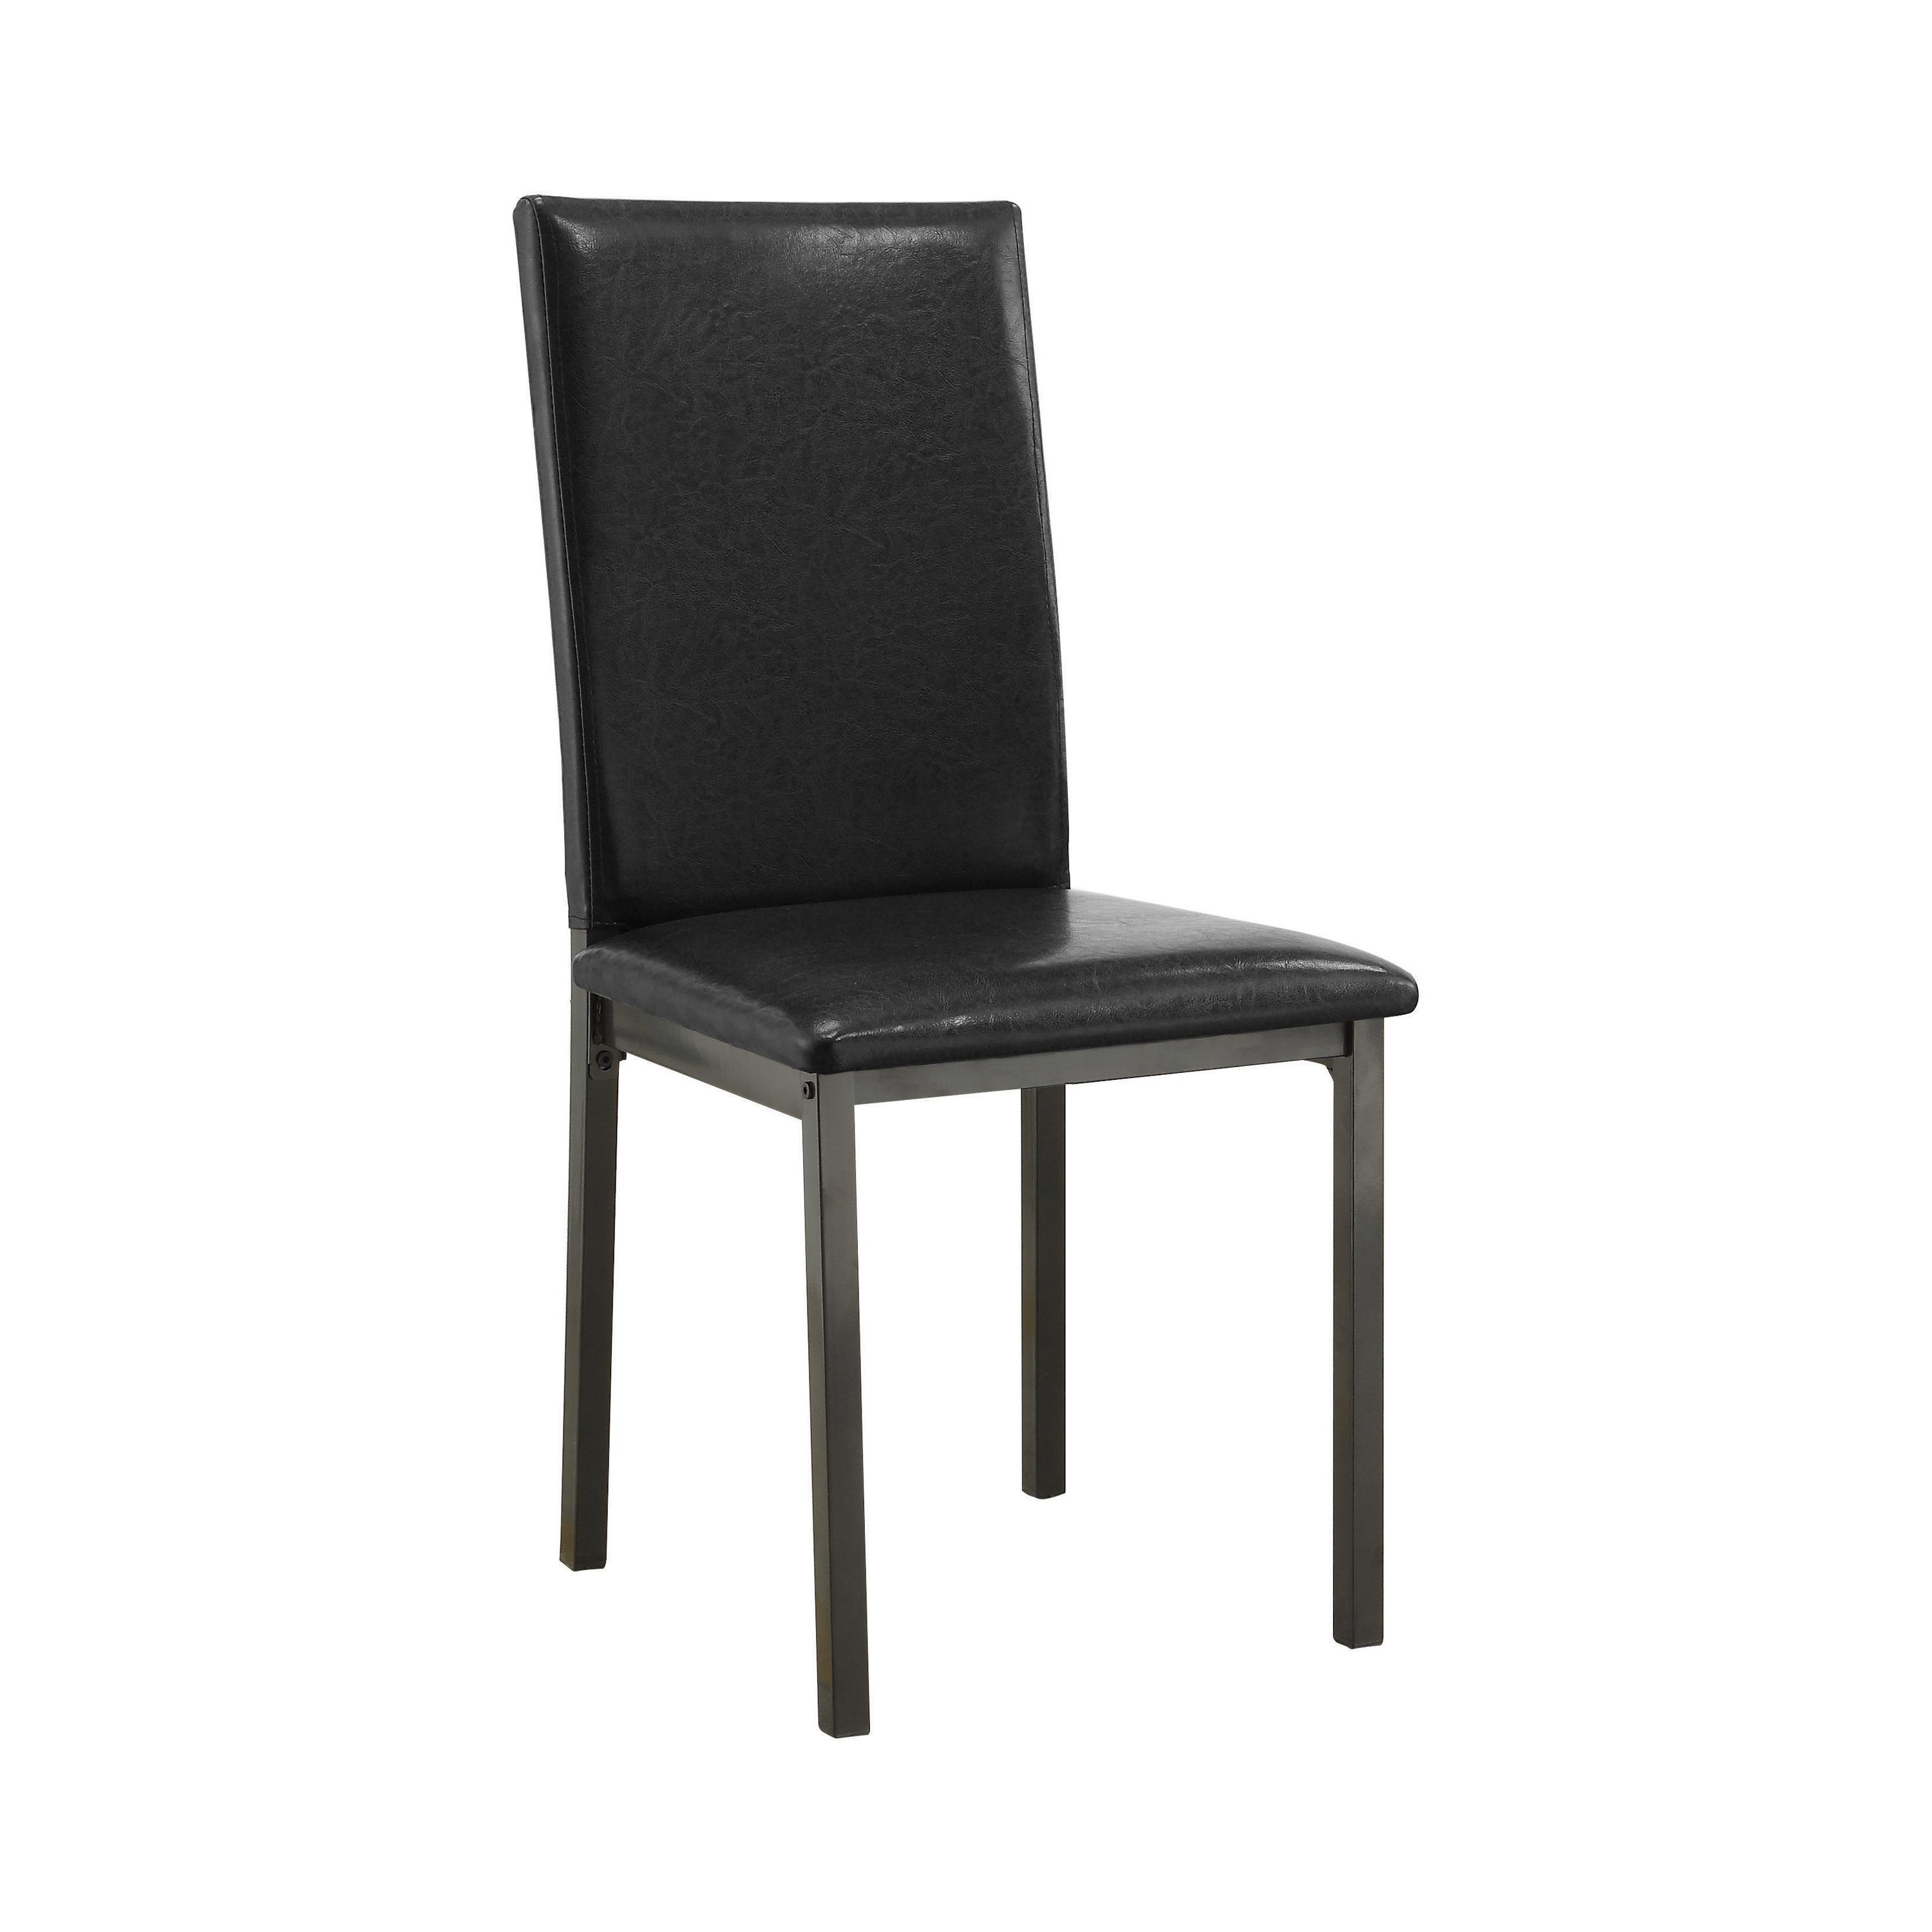 Transitional Side Chair Set 100612 Garza 100612 in Black Leatherette